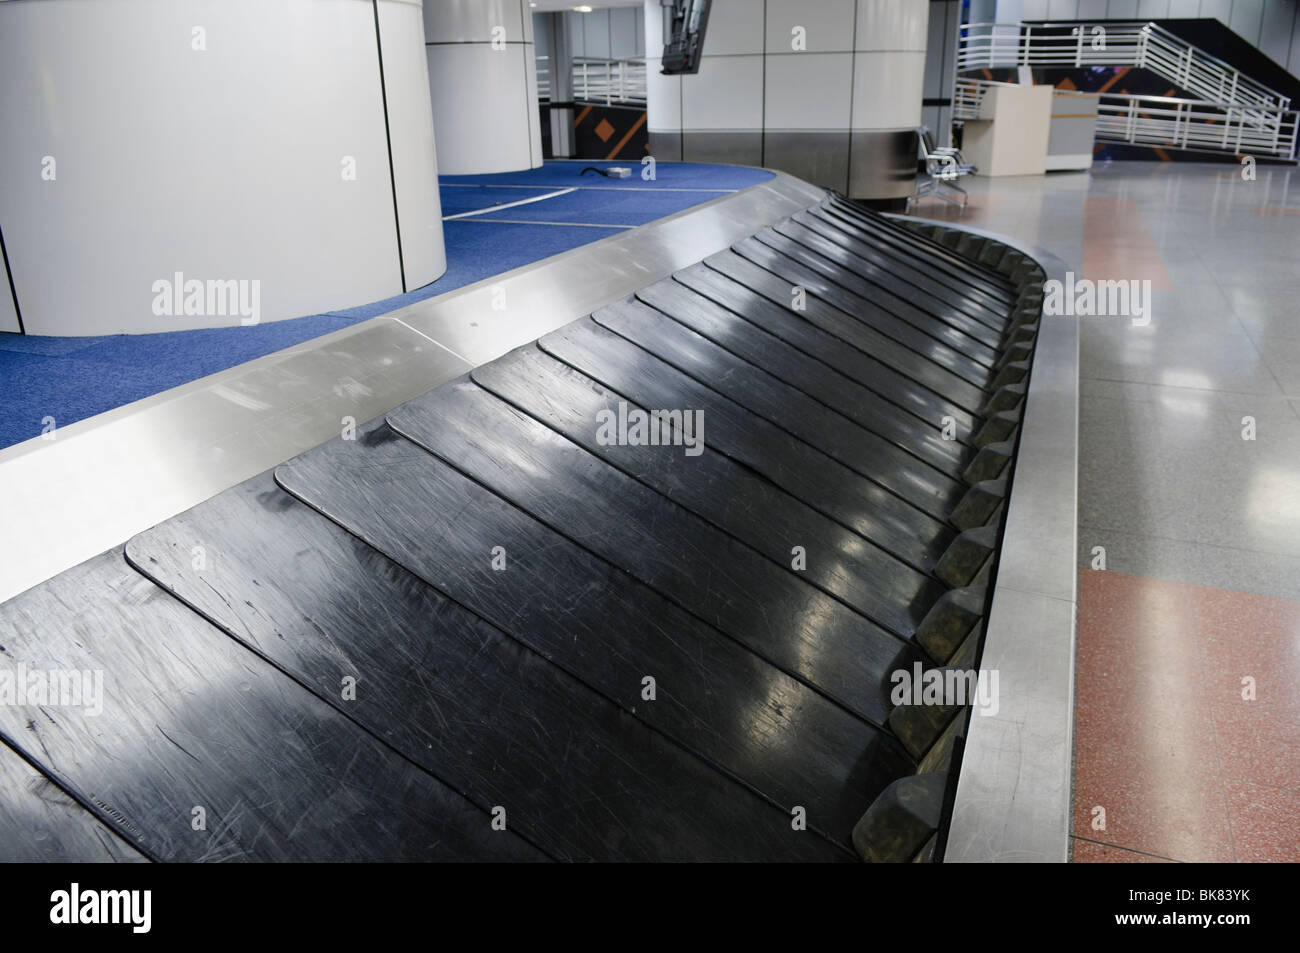 Empty luggage/baggage carousel at an airport Stock Photo